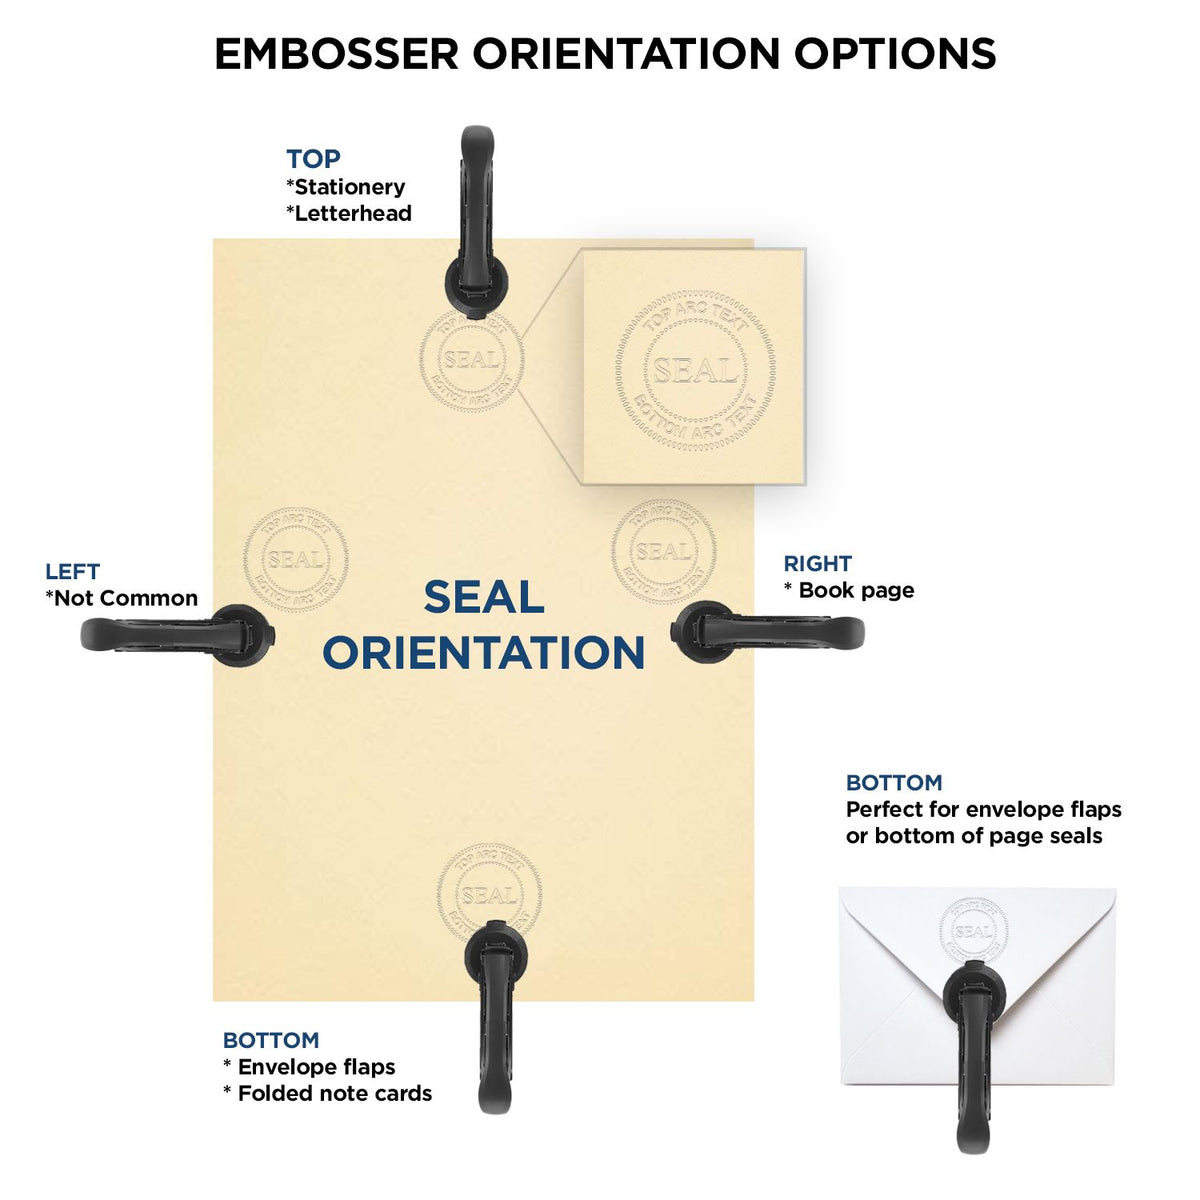 An infographic for the Extended Long Reach Idaho Surveyor Embosser showing embosser orientation, this is showing examples of a top, bottom, right and left insert.